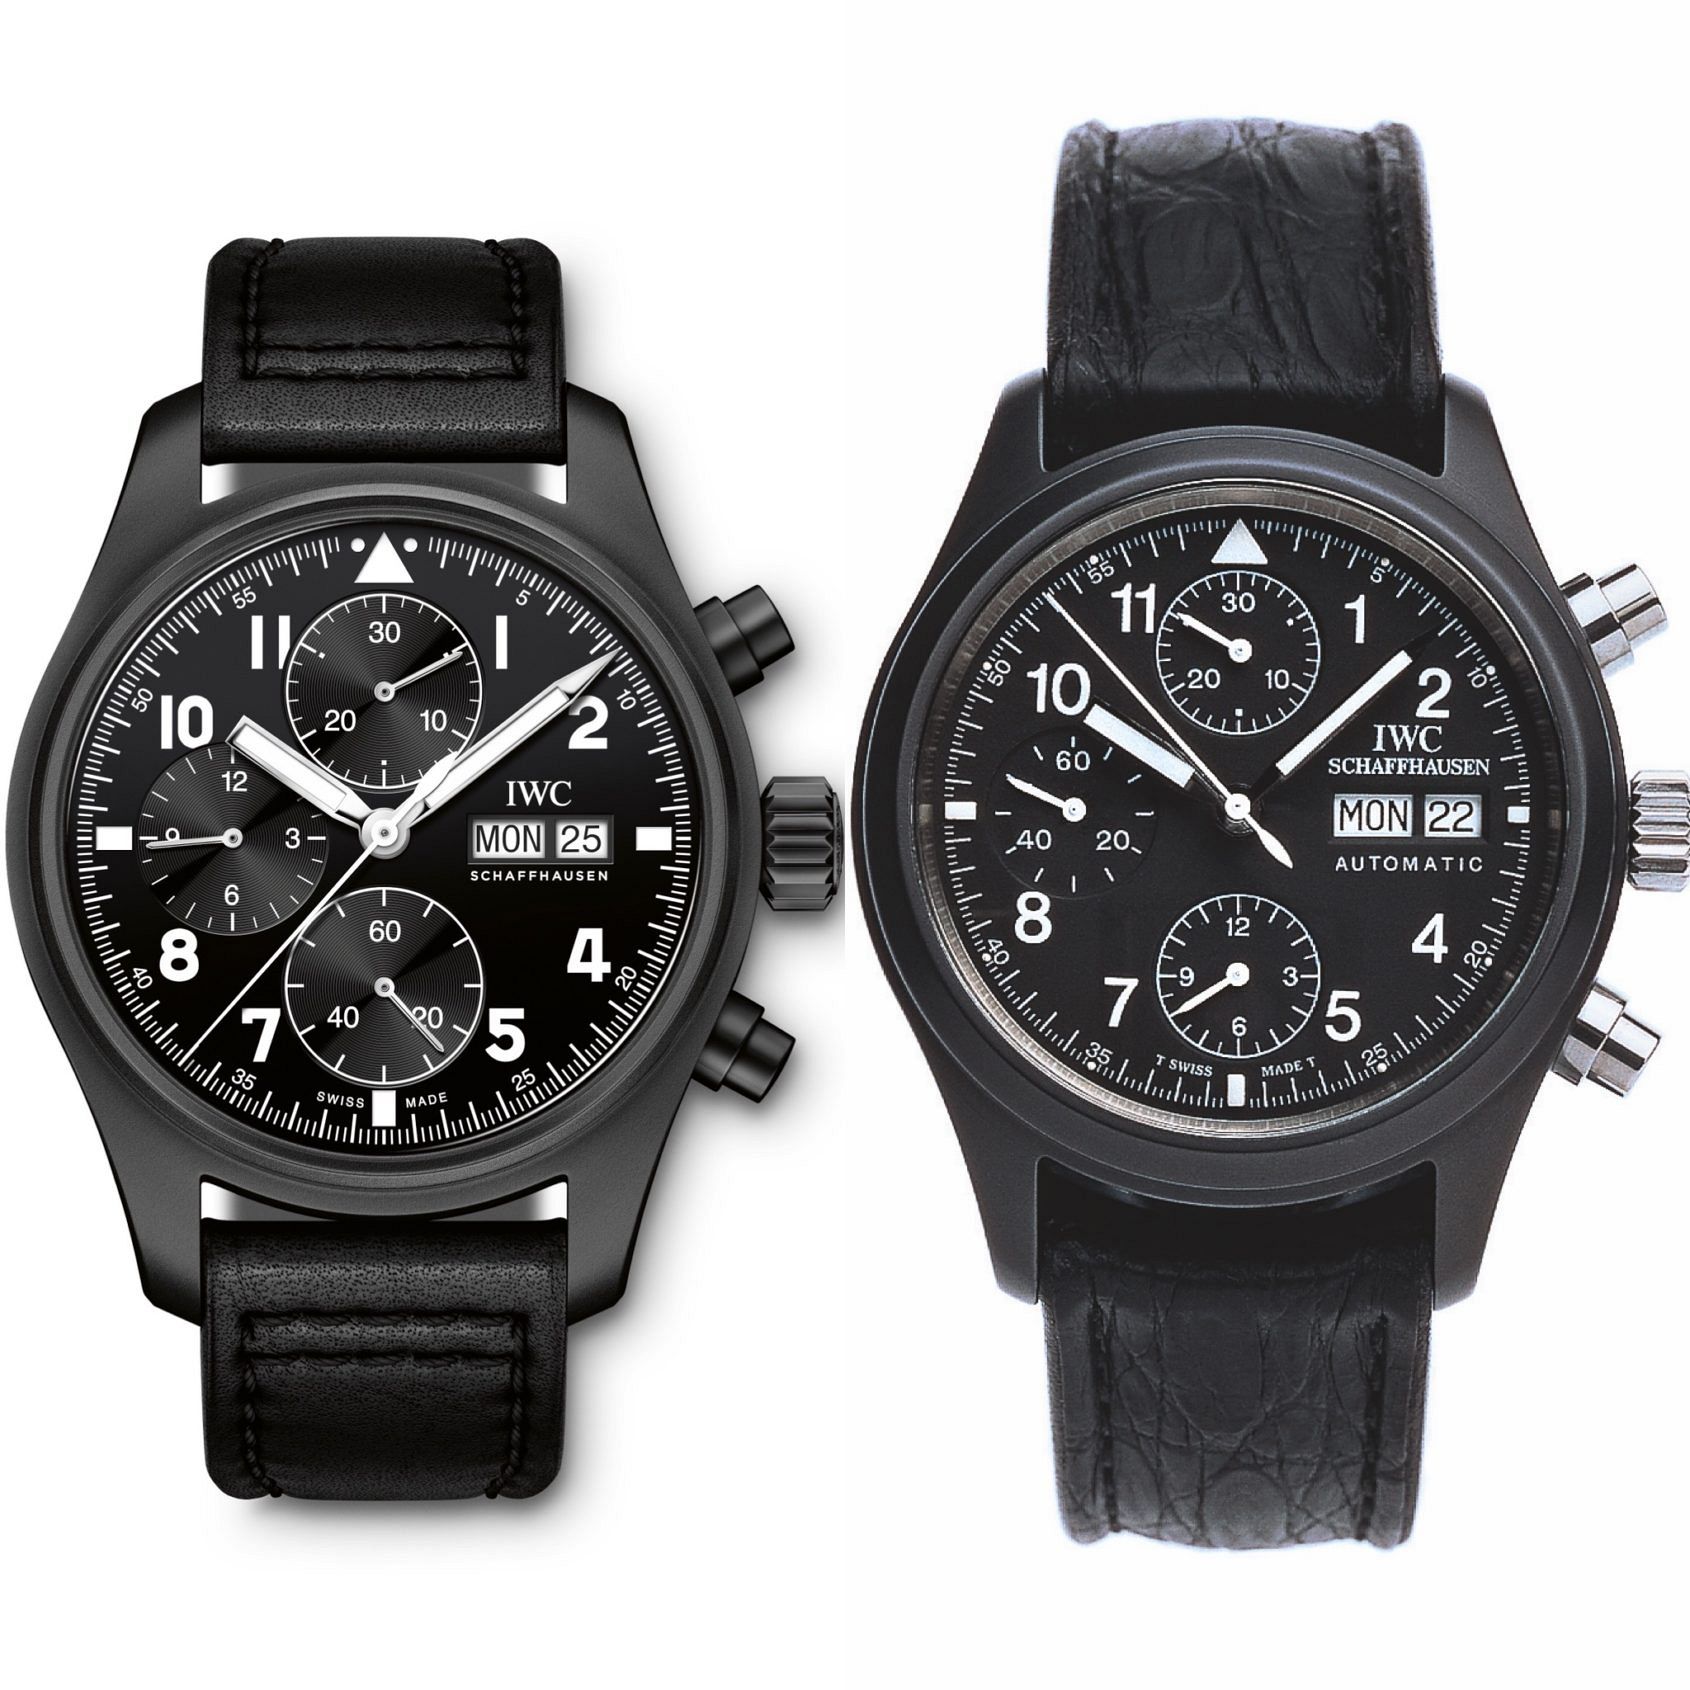 INTRODUCING: The IWC Pilot’s Watch Chronograph Edition “Tribute to 3705”